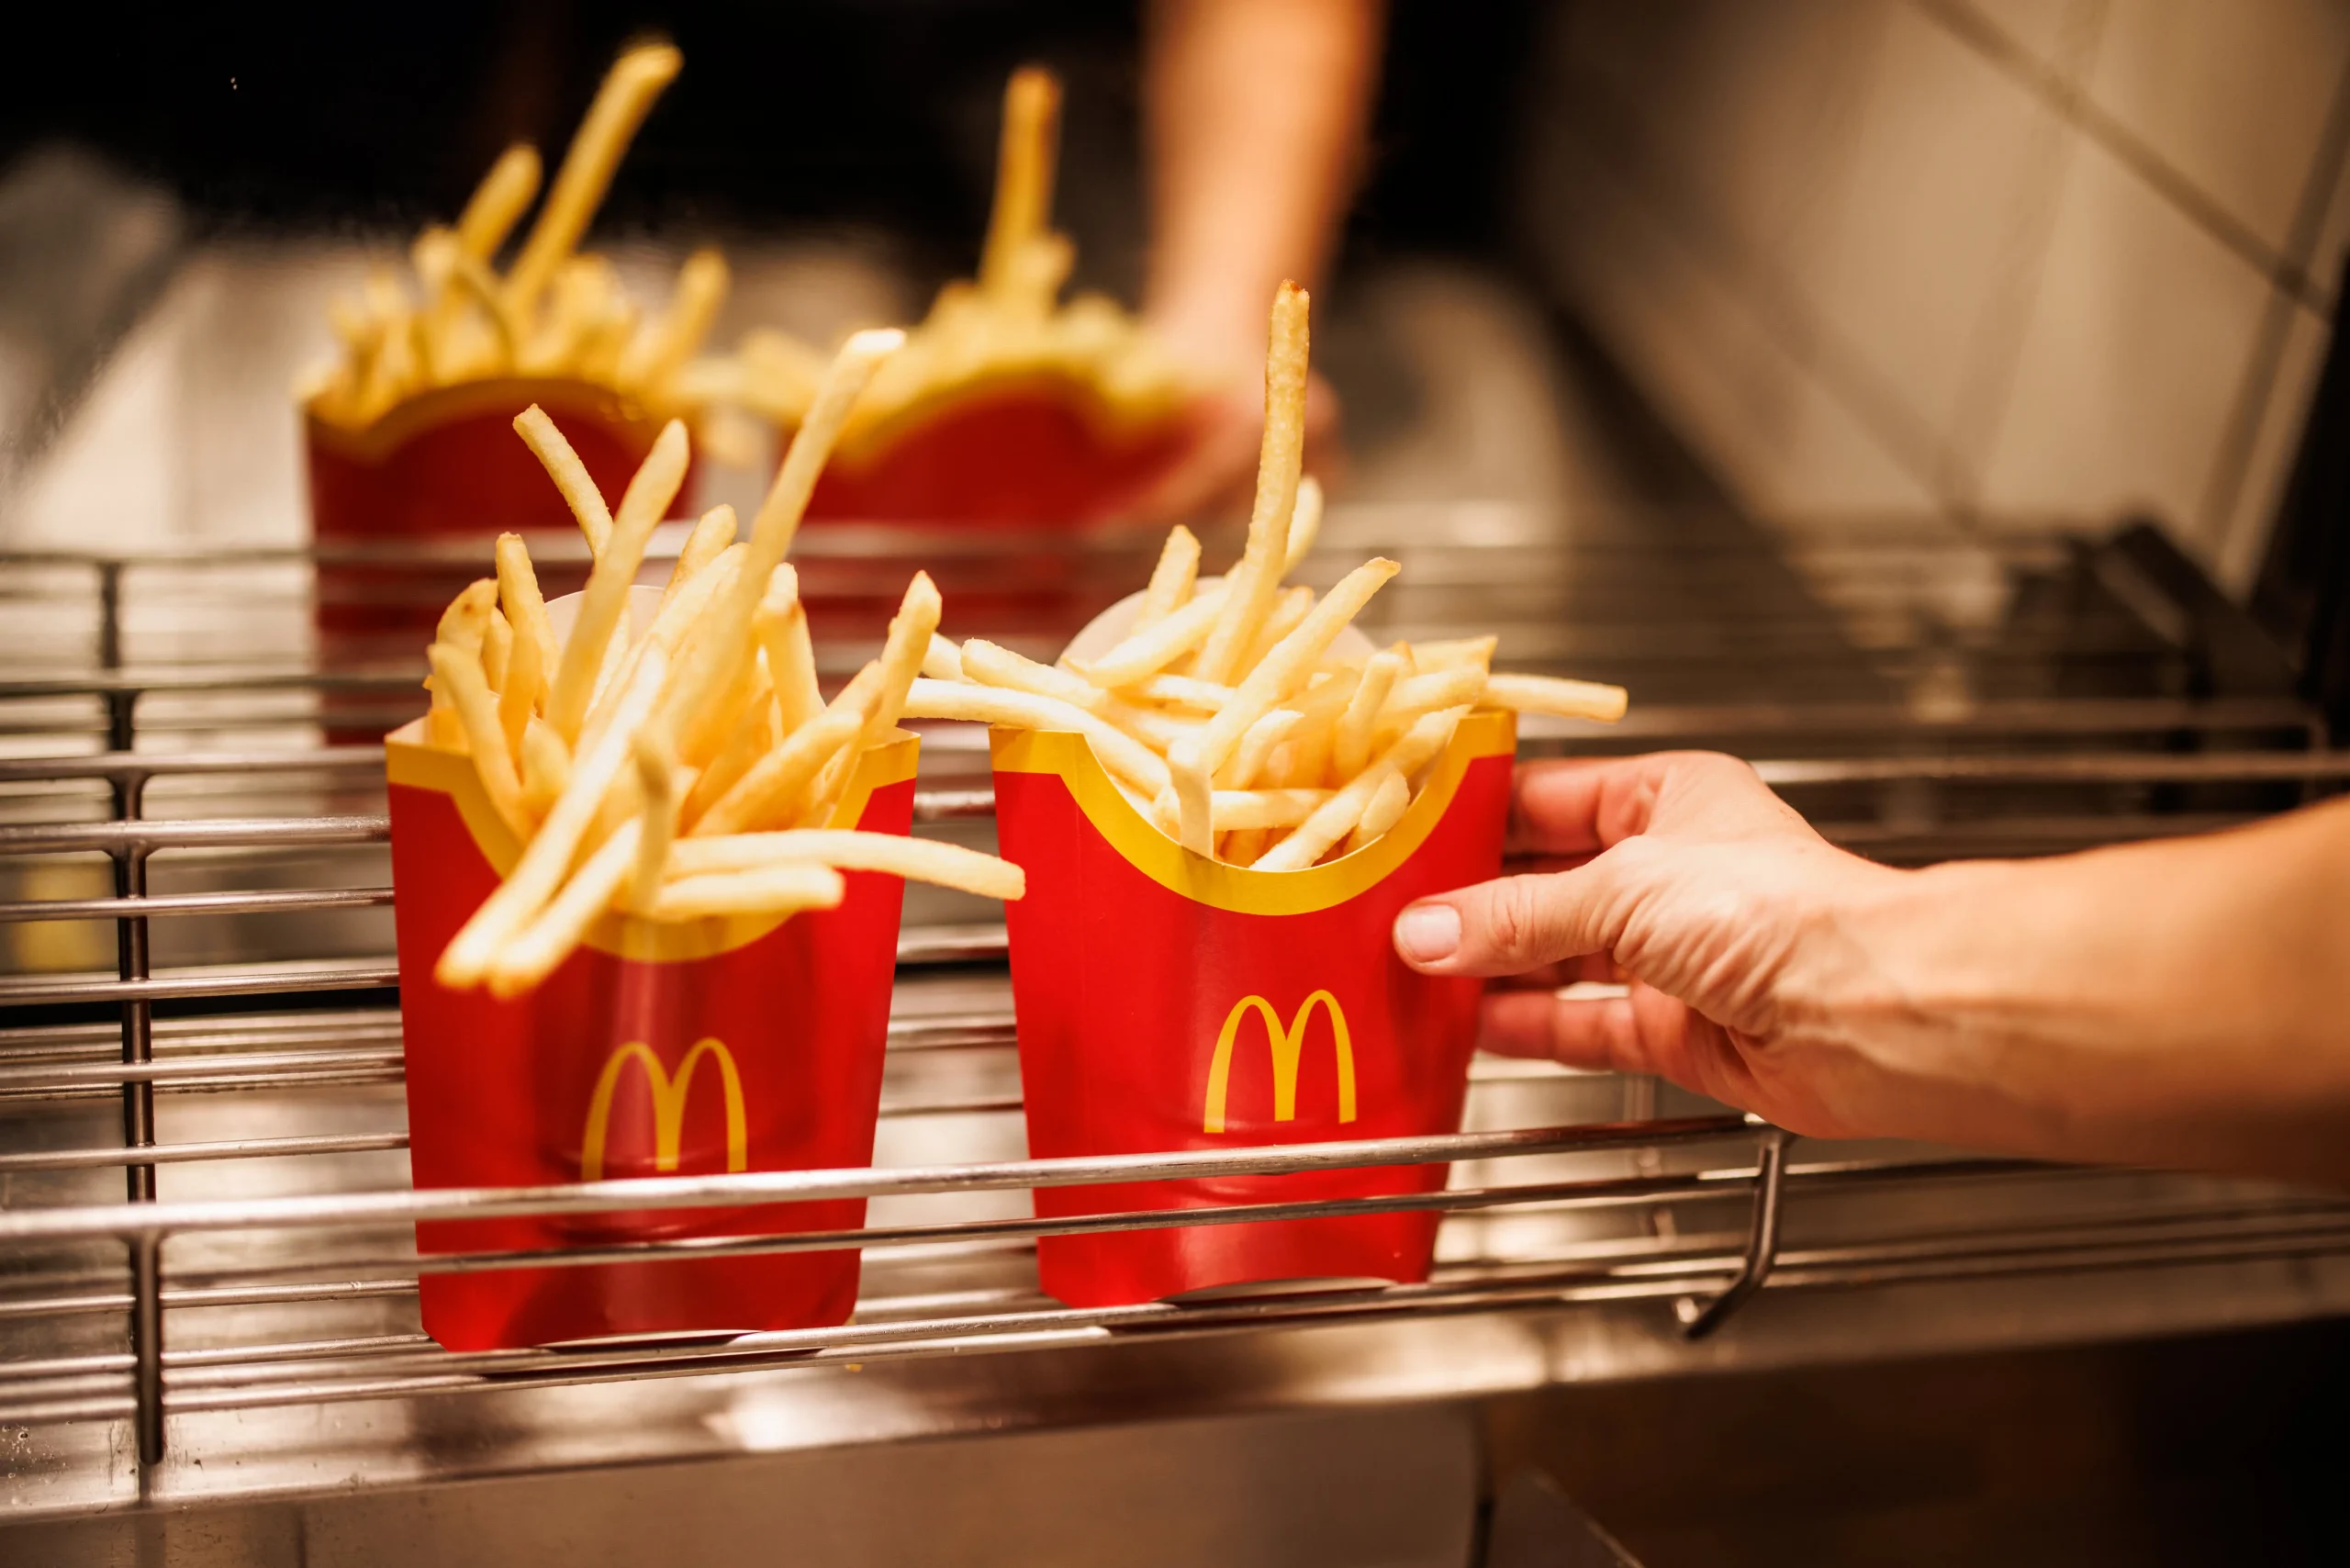 McDonald's Is Giving Away Free Fries On Friday For The Rest Of The Year